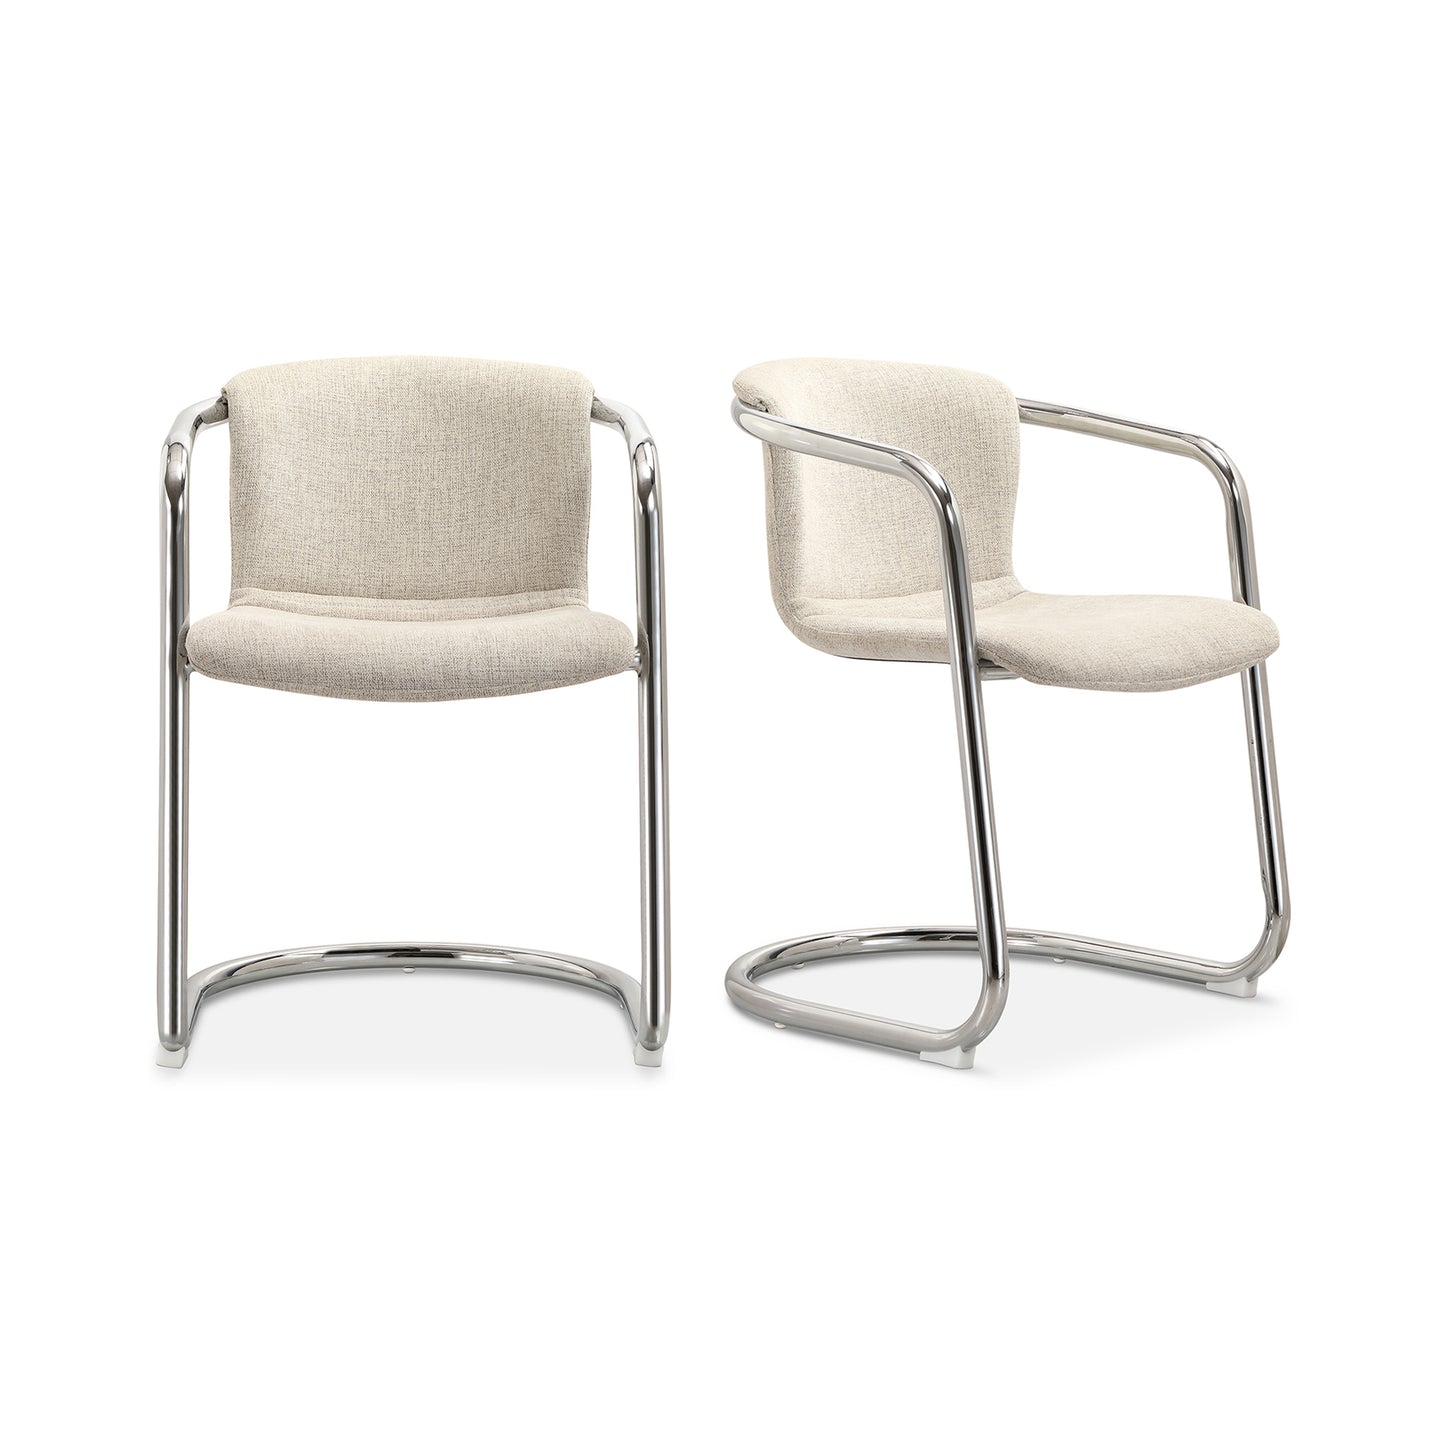 Freeman Chrome Frame Dining Chair Blended Cream - Set of Two Dining Chairs Moe's Default Title    Dining Chairs,https://www.oldbonesco.com,Mid Century Furniture, Furniture Sale, Old Bones Co, Mid Century Sale, Four Hands Furniture, Sale,Gus, Sale,Perigold Freeman Chrome Frame Dining Chair Blended Cream - Set of Two Dining Chairs Sale, Perigold Sale Freeman Chrome Frame Dining Chair Blended Cream - Set of Two,Freeman Chrome Frame Dining Chair Blended Cream - Set of Two Lulu and Georgia,Burke Decor Sale Freem